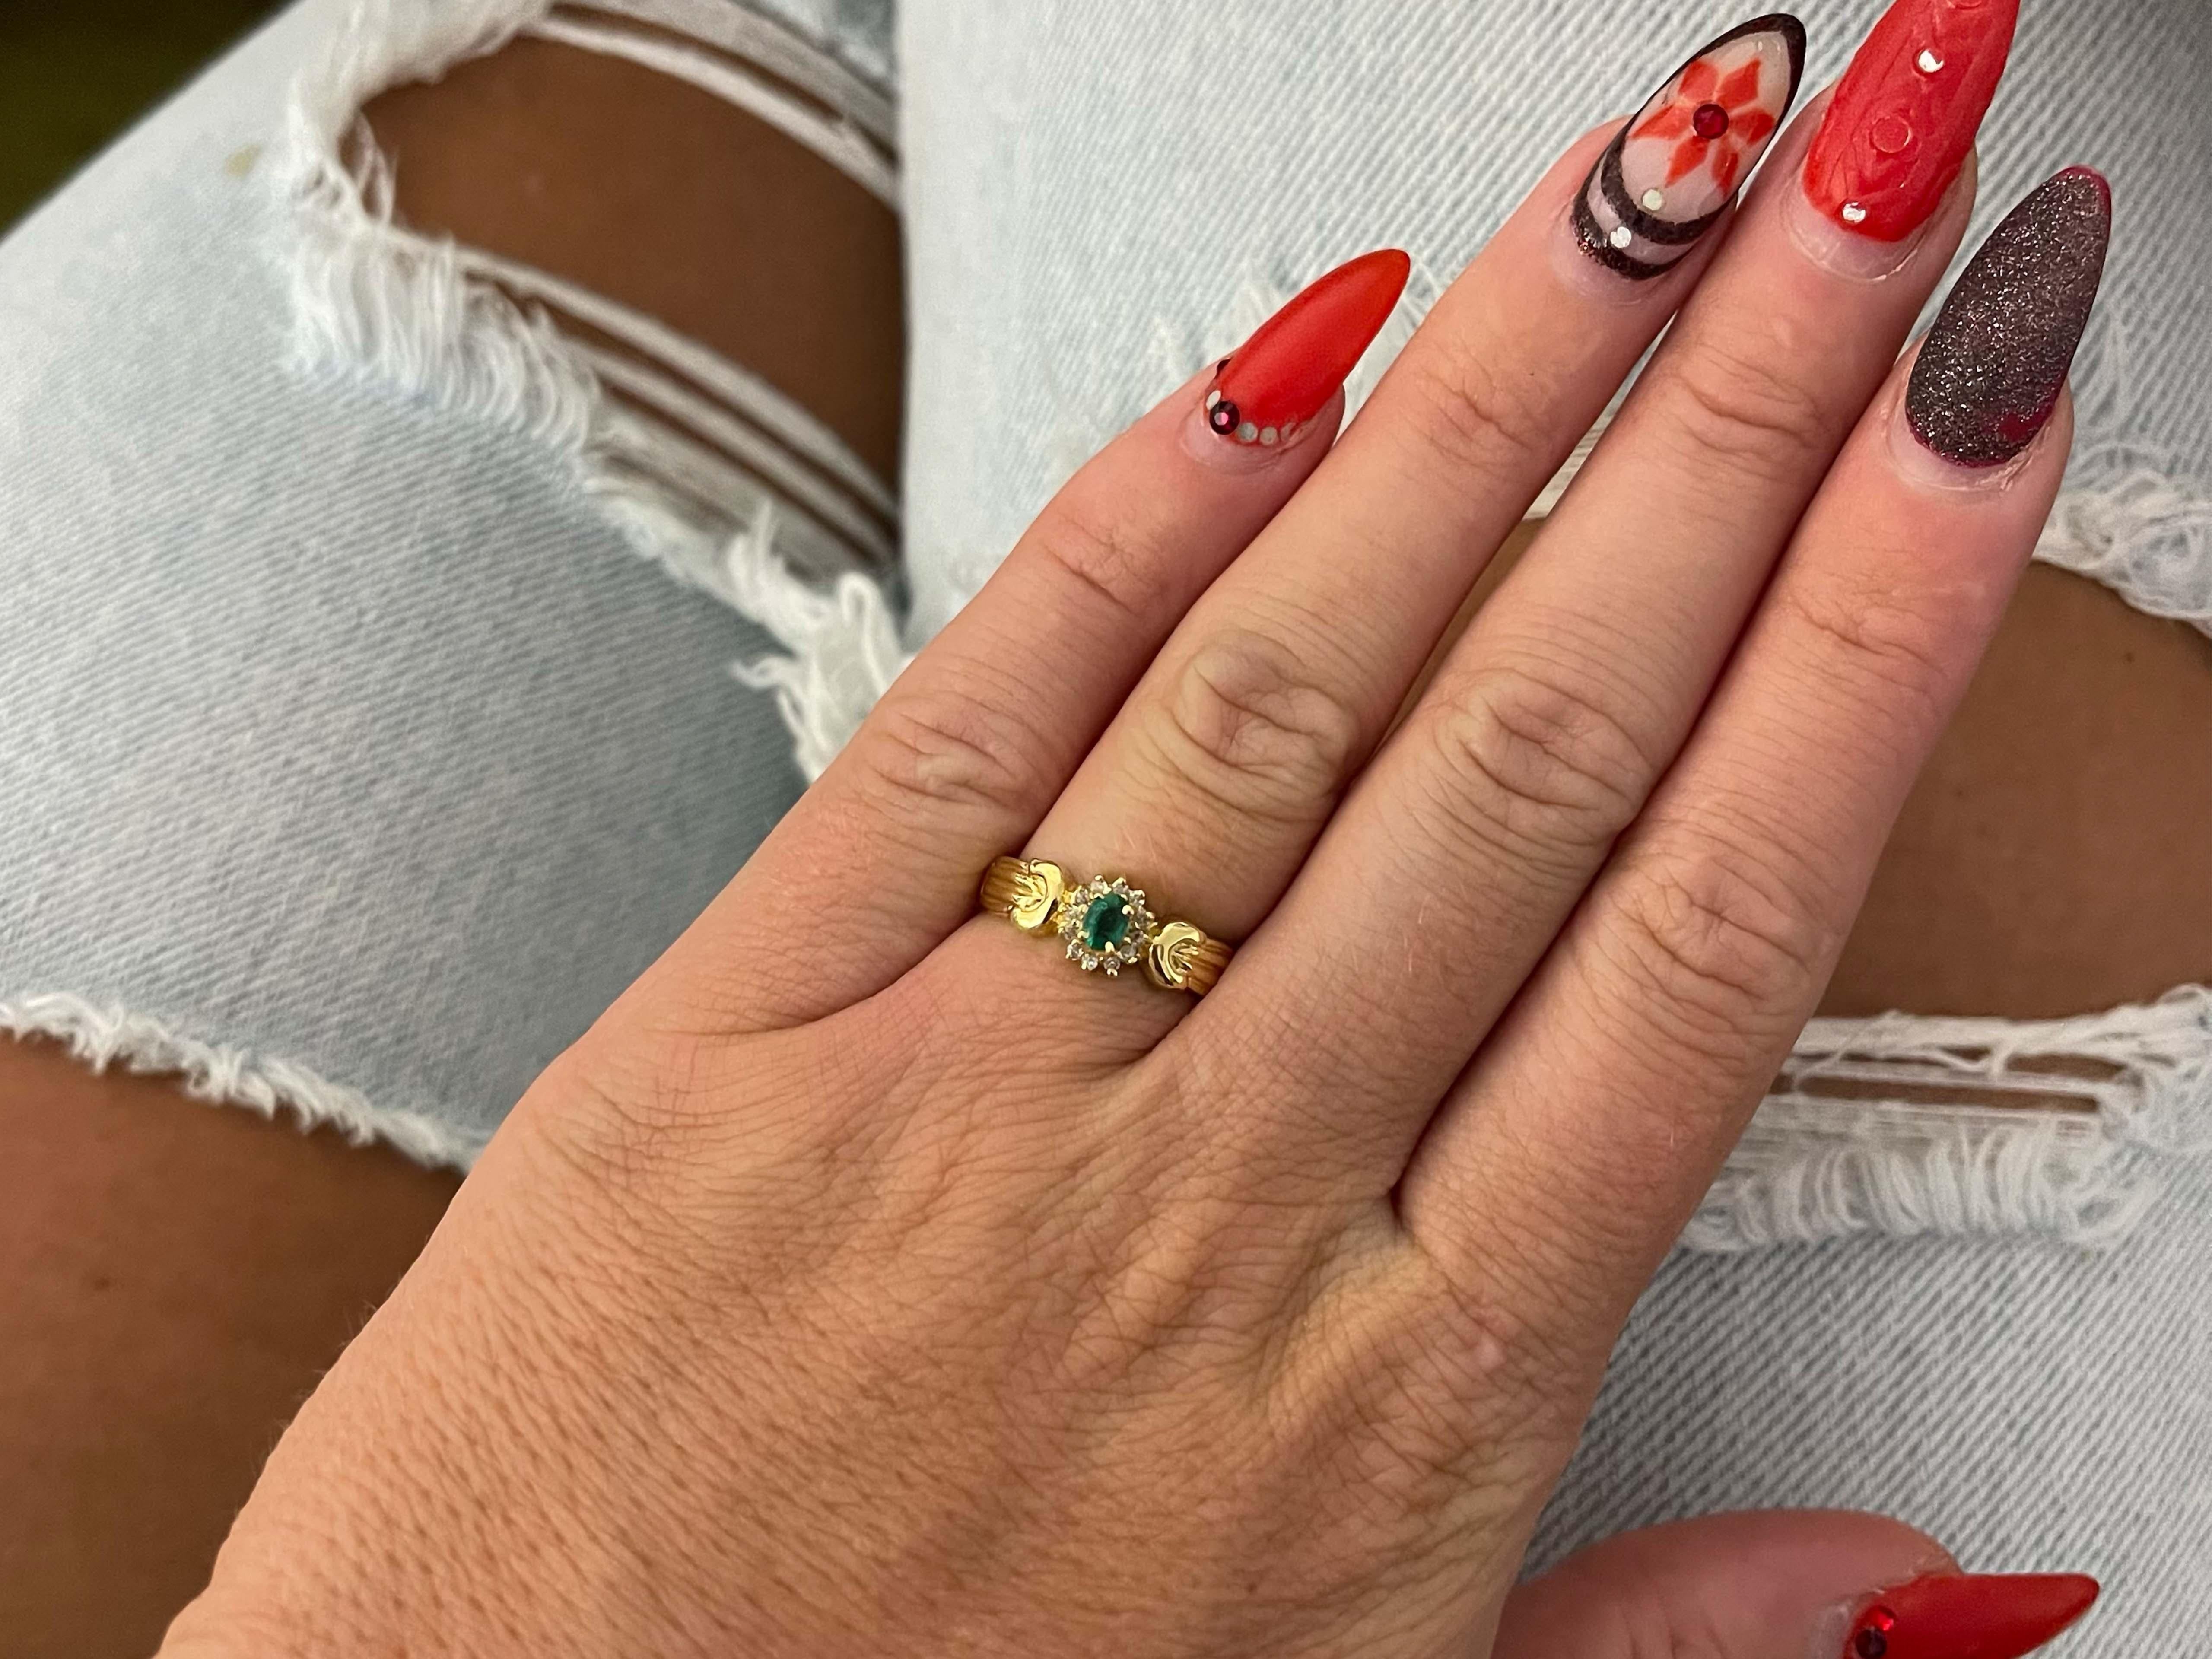 Item Specifications:

Metal: 14K Yellow Gold

Style: Statement Ring

Ring Size: 6.5 (resizing available for a fee)

Total Weight: 2.5 Grams

Ring Height: 7.18 mm

Gemstone Specifications:

Gemstone: 1 Green Emerald

Shape: Oval

Emerald